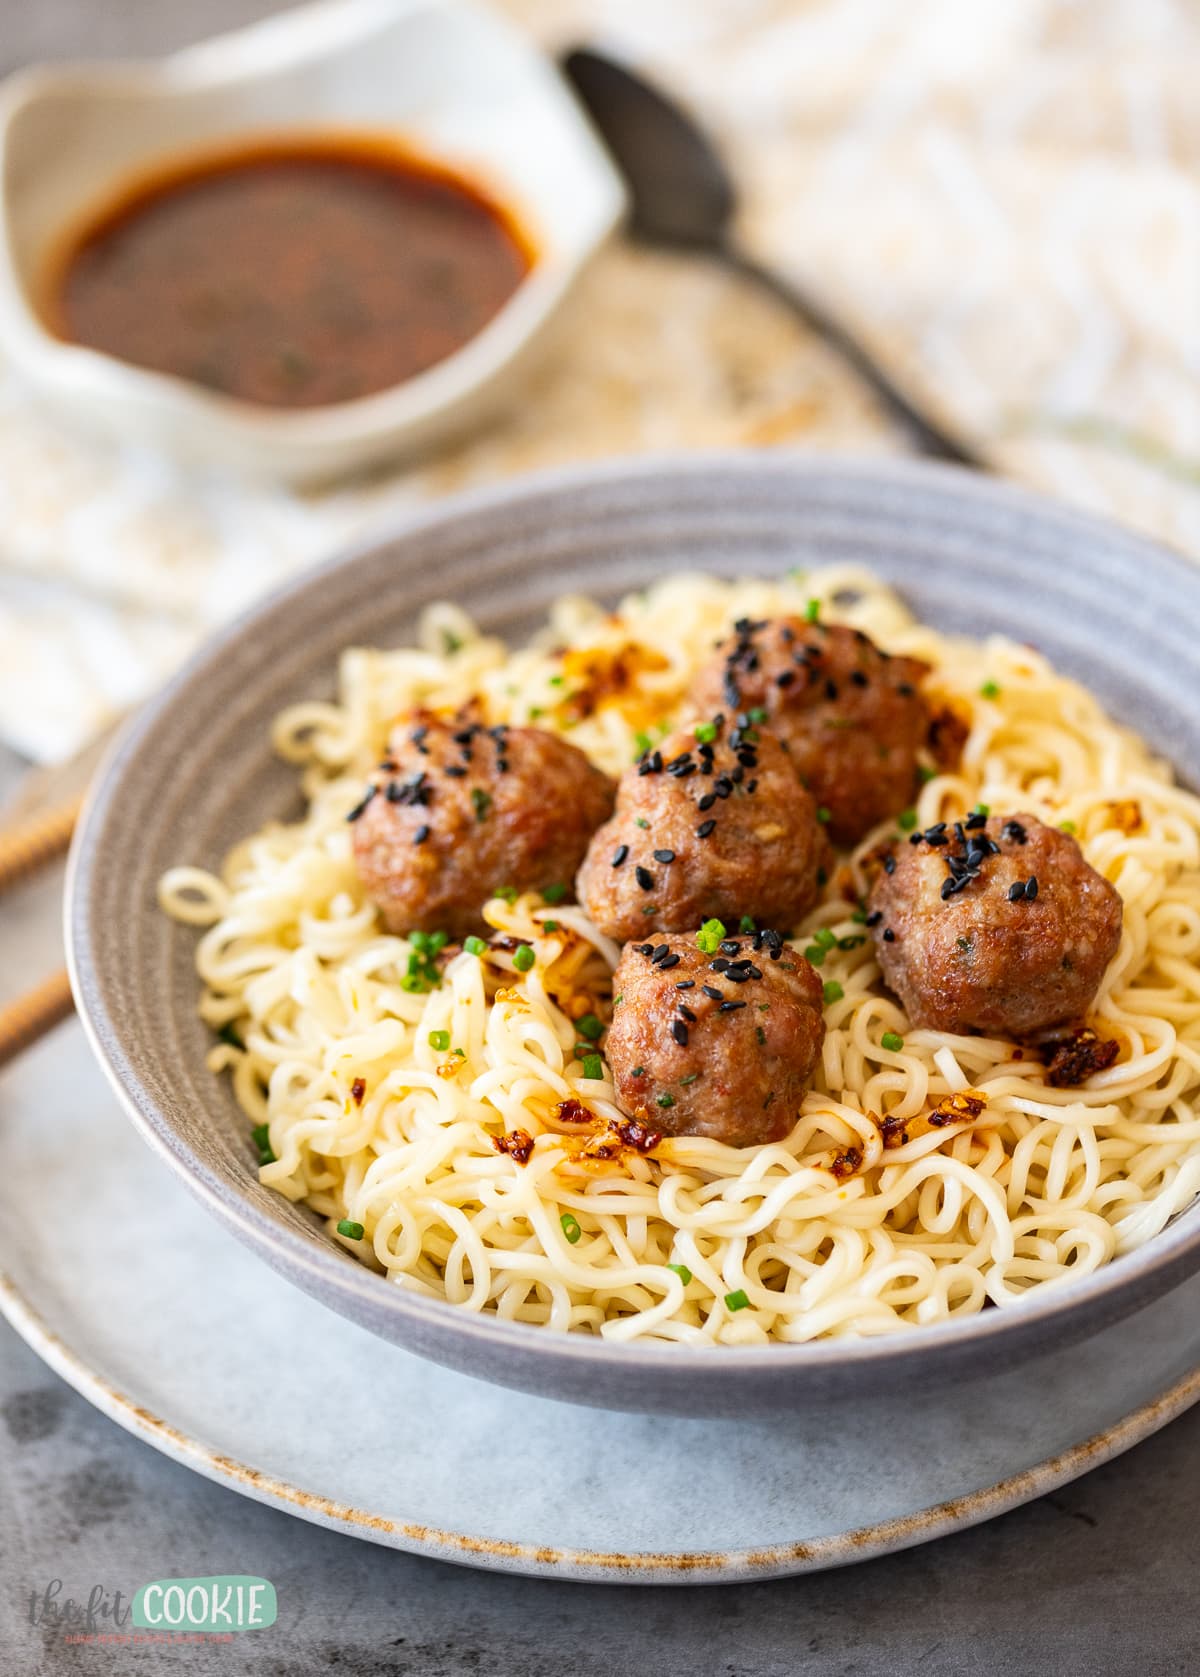 A bowl of pork meatballs with sauce.